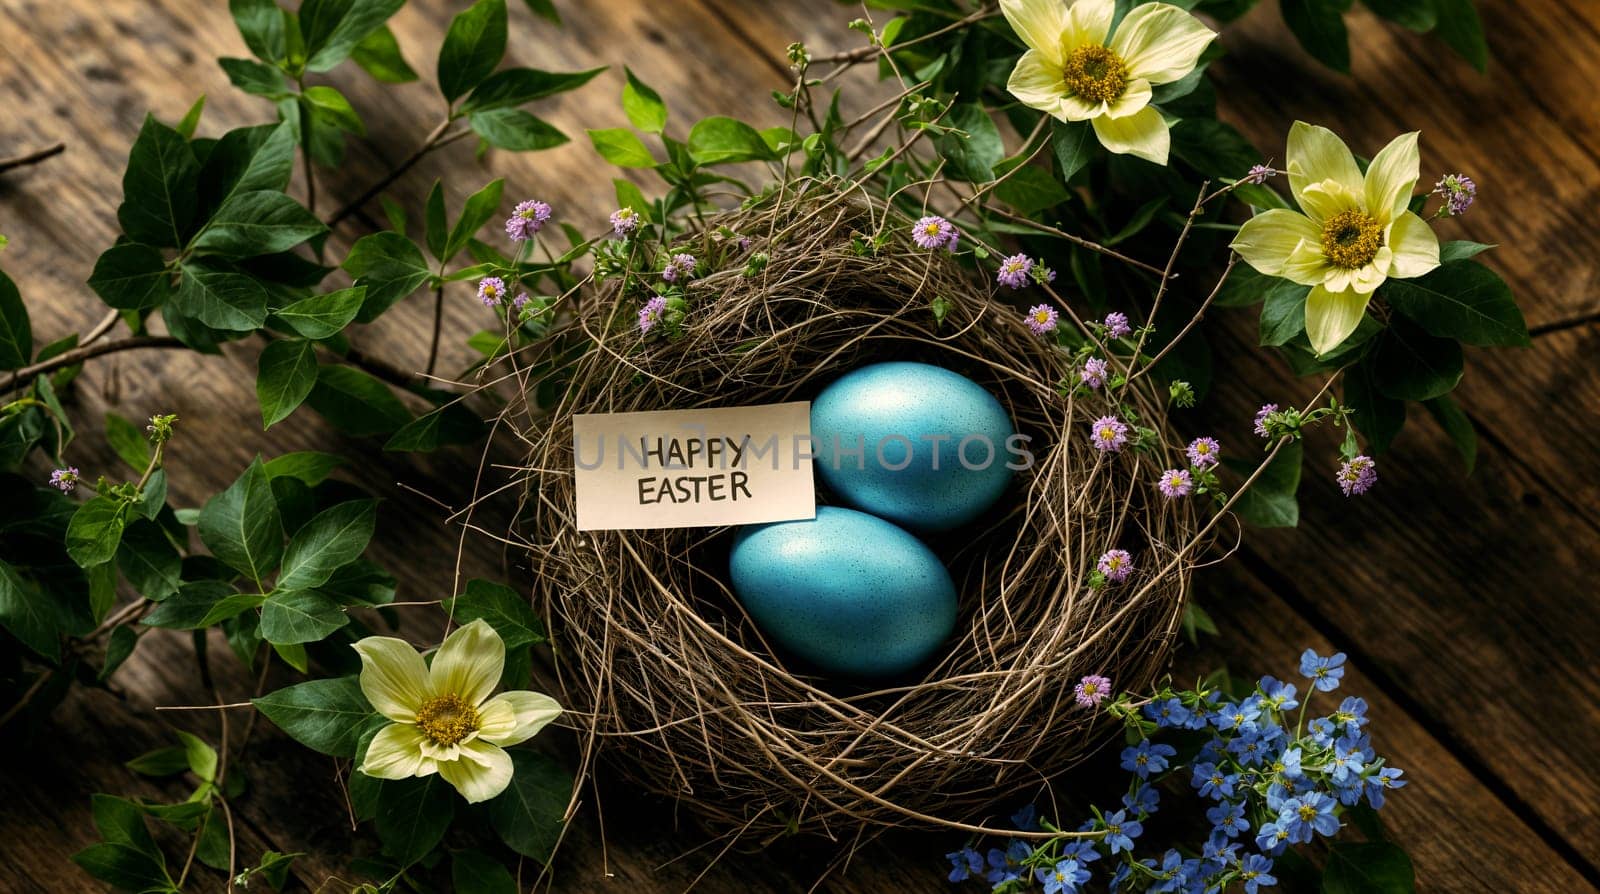 Happy Easter Greeting With Blue Eggs in a Birds Nest Among Flowers by chrisroll